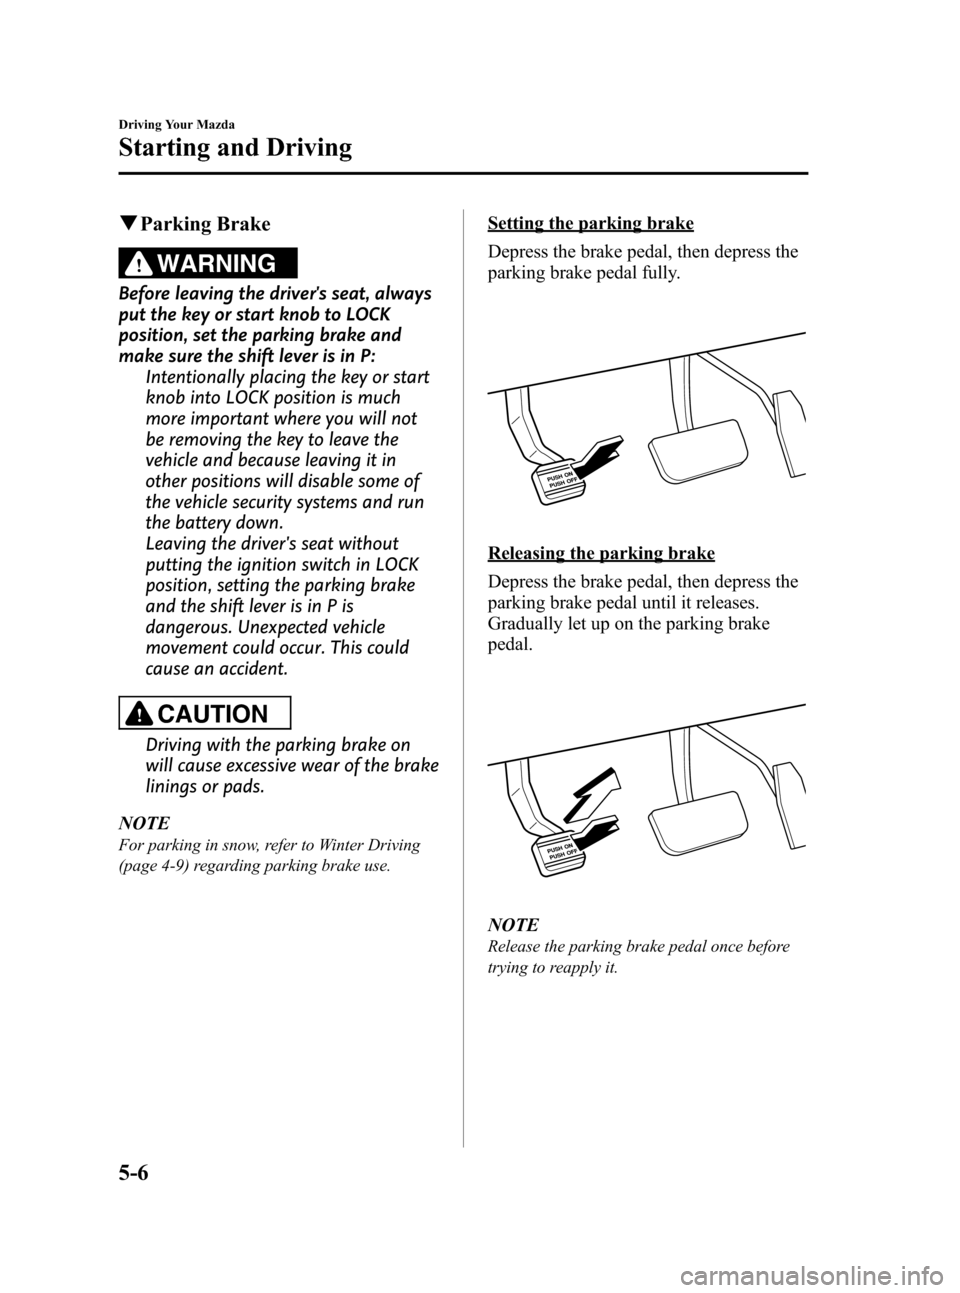 MAZDA MODEL CX-7 2009  Owners Manual (in English) Black plate (164,1)
qParking Brake
WARNING
Before leaving the drivers seat, always
put the key or start knob to LOCK
position, set the parking brake and
make sure the shift lever is in P:
Intentional